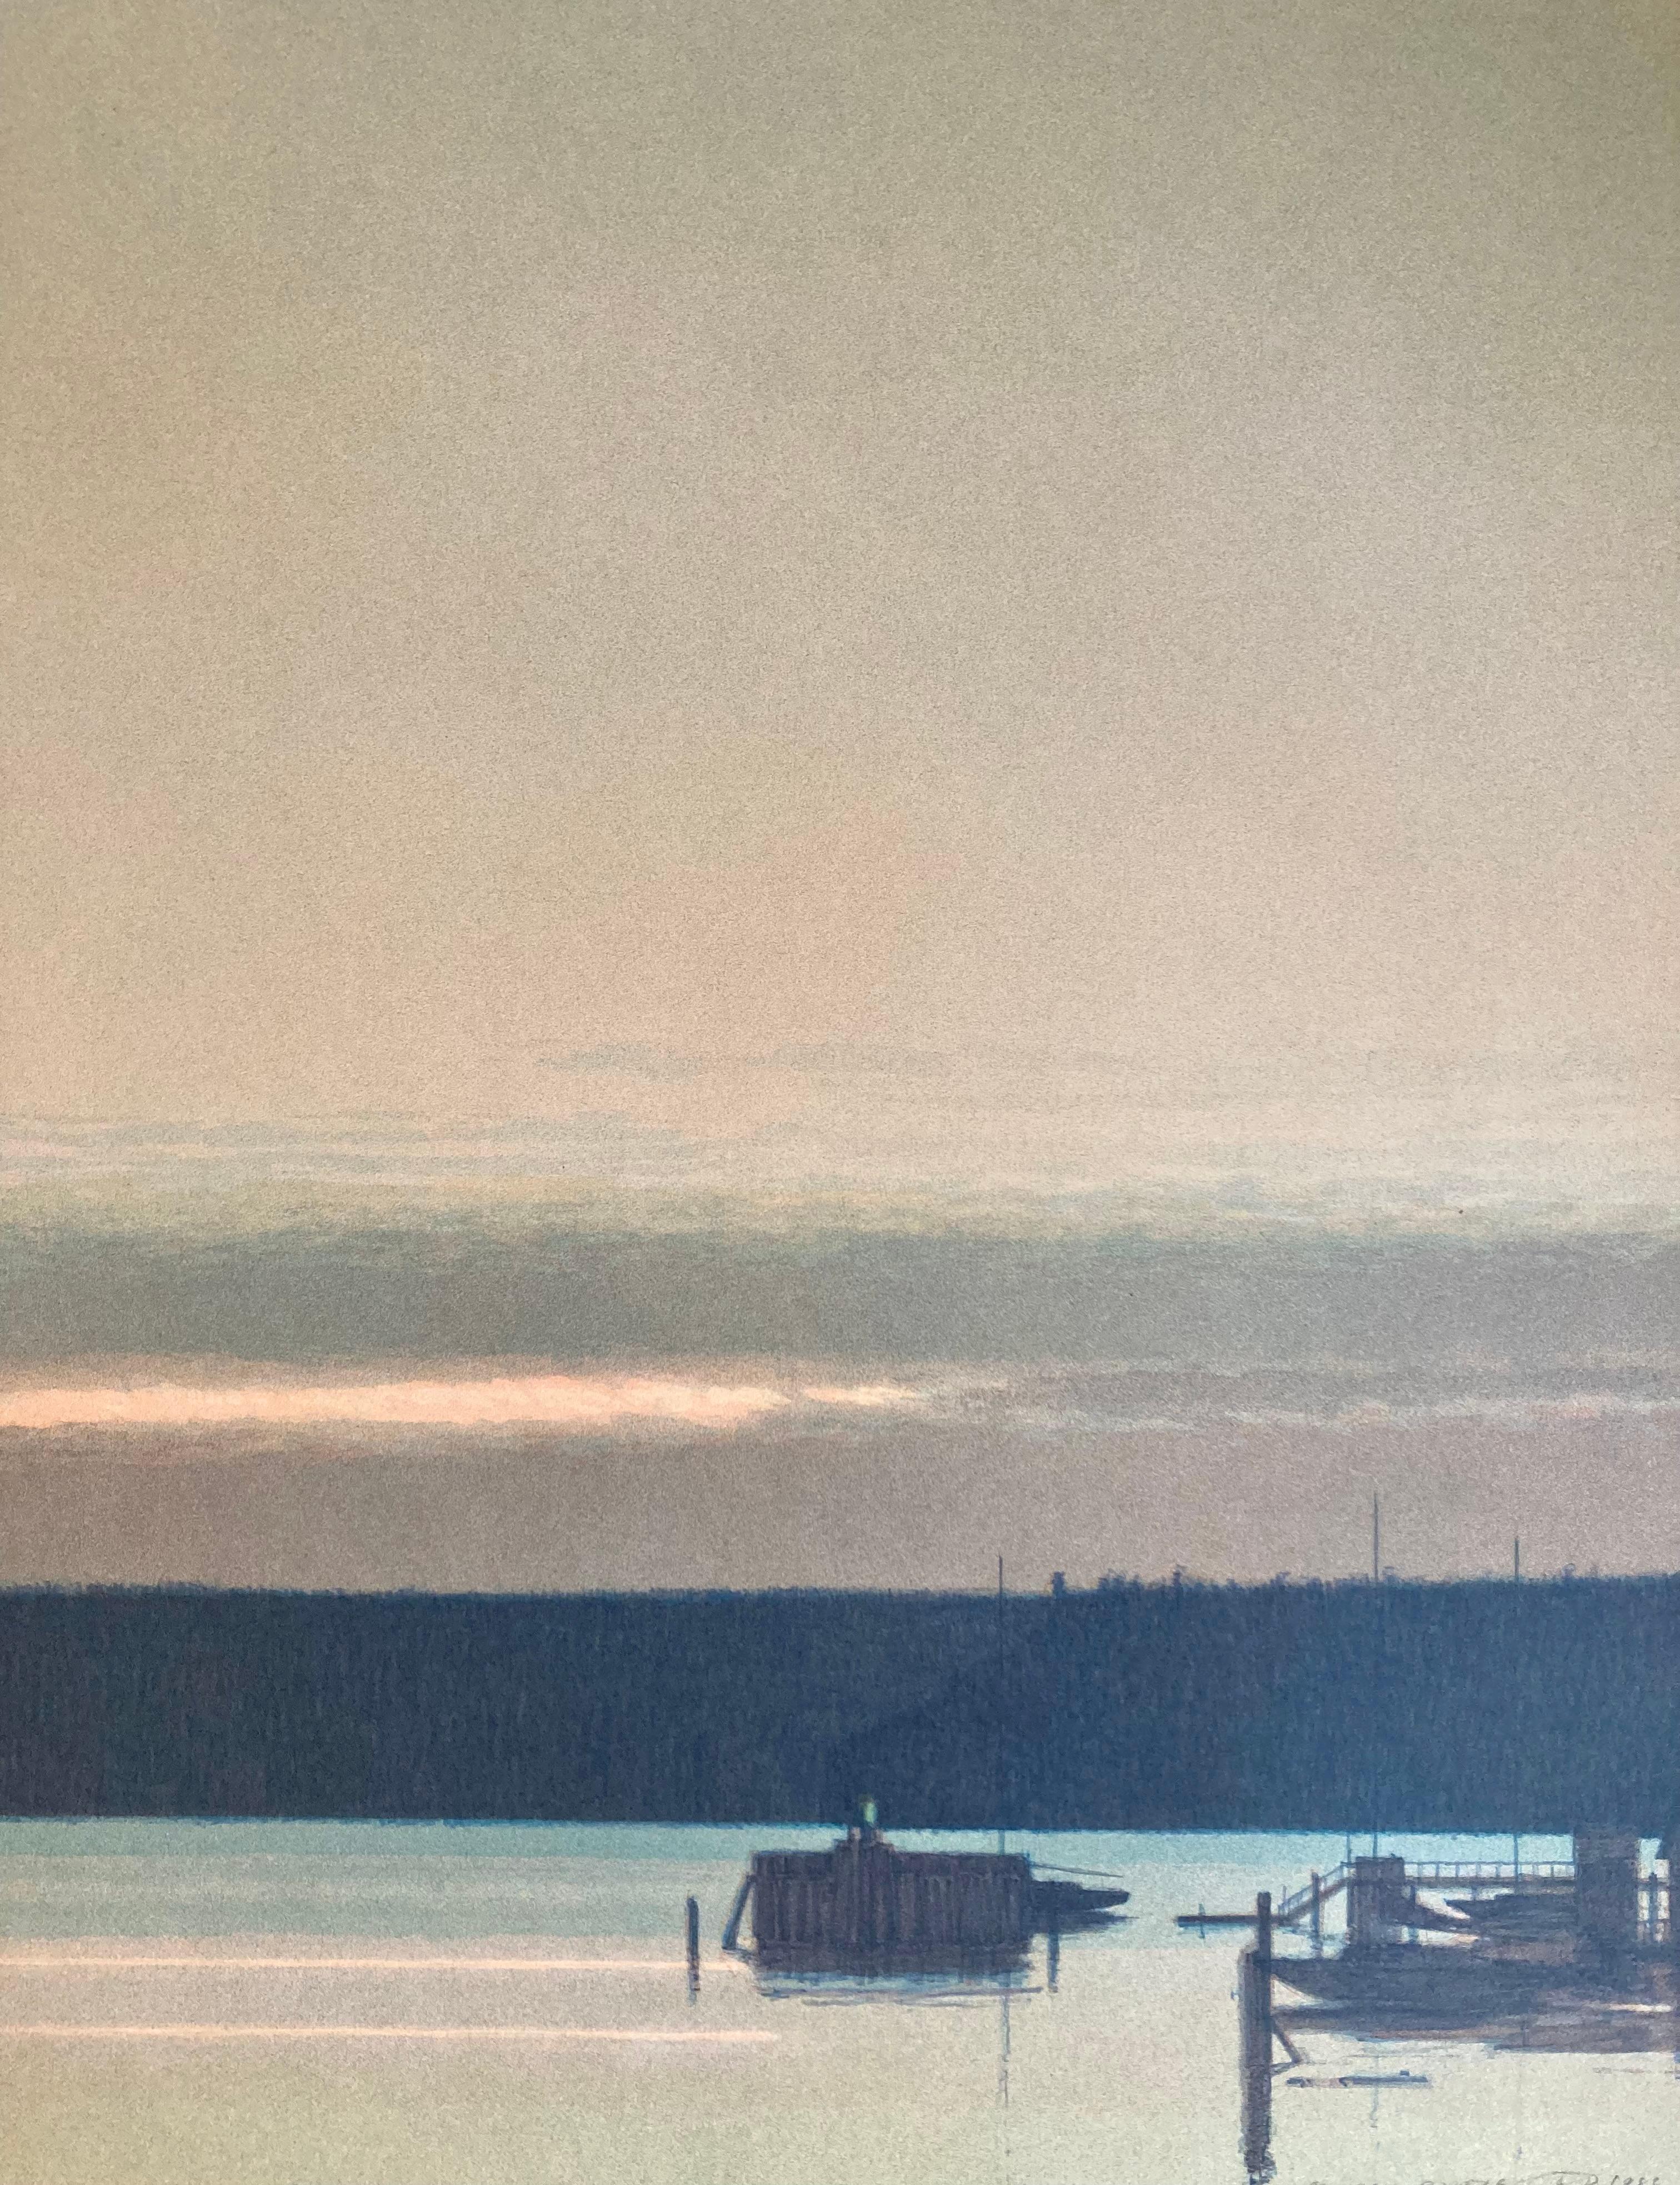 This is an Russell Chatham lithograph “1988 harbor at evening” artist proof. In good condition Unframed. 45x35

